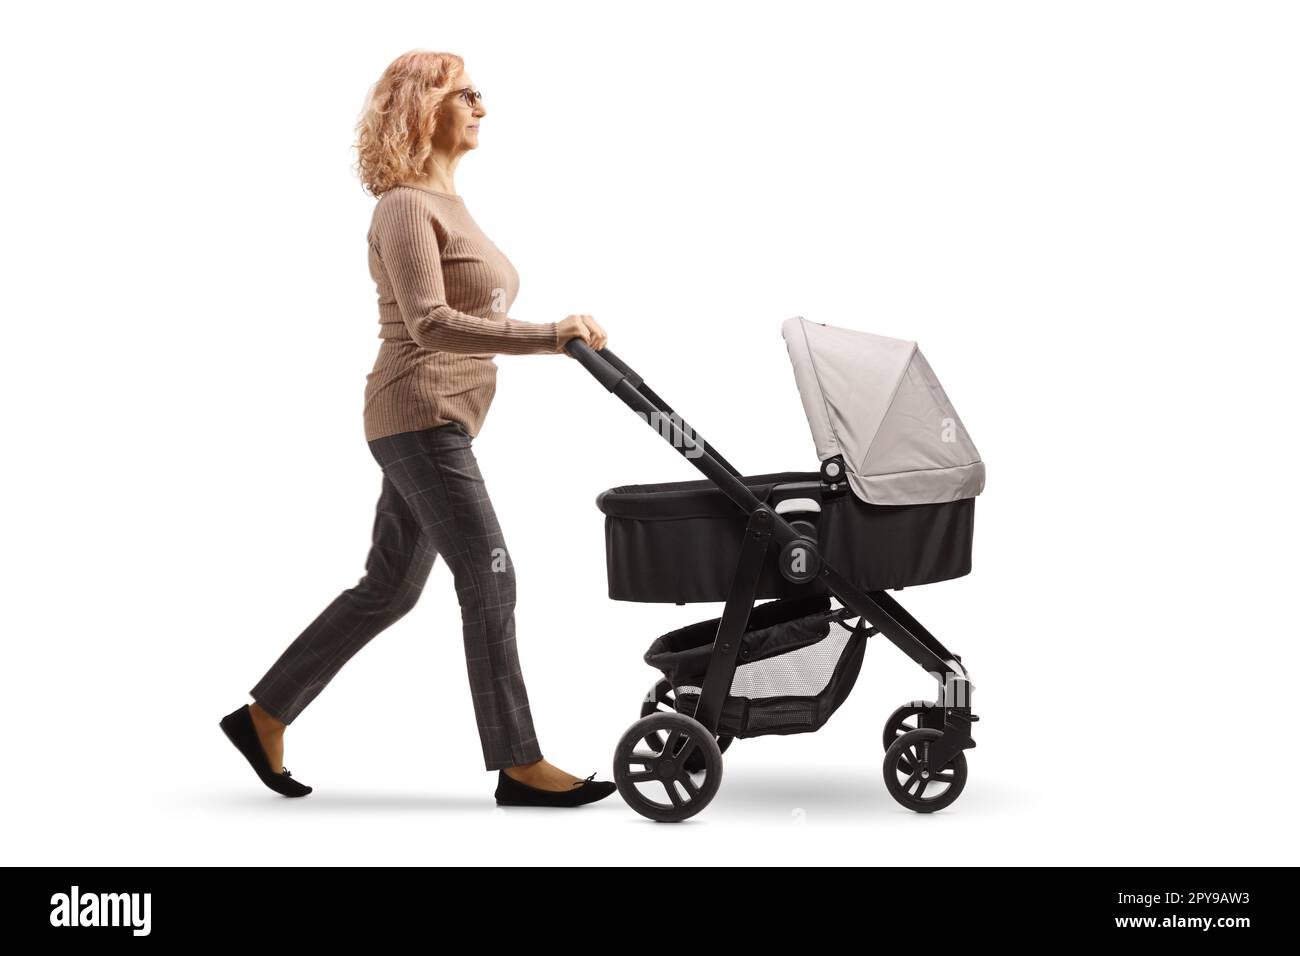 Full length shot of a mature woman pushing a baby stroller isolated on white background Stock Photo